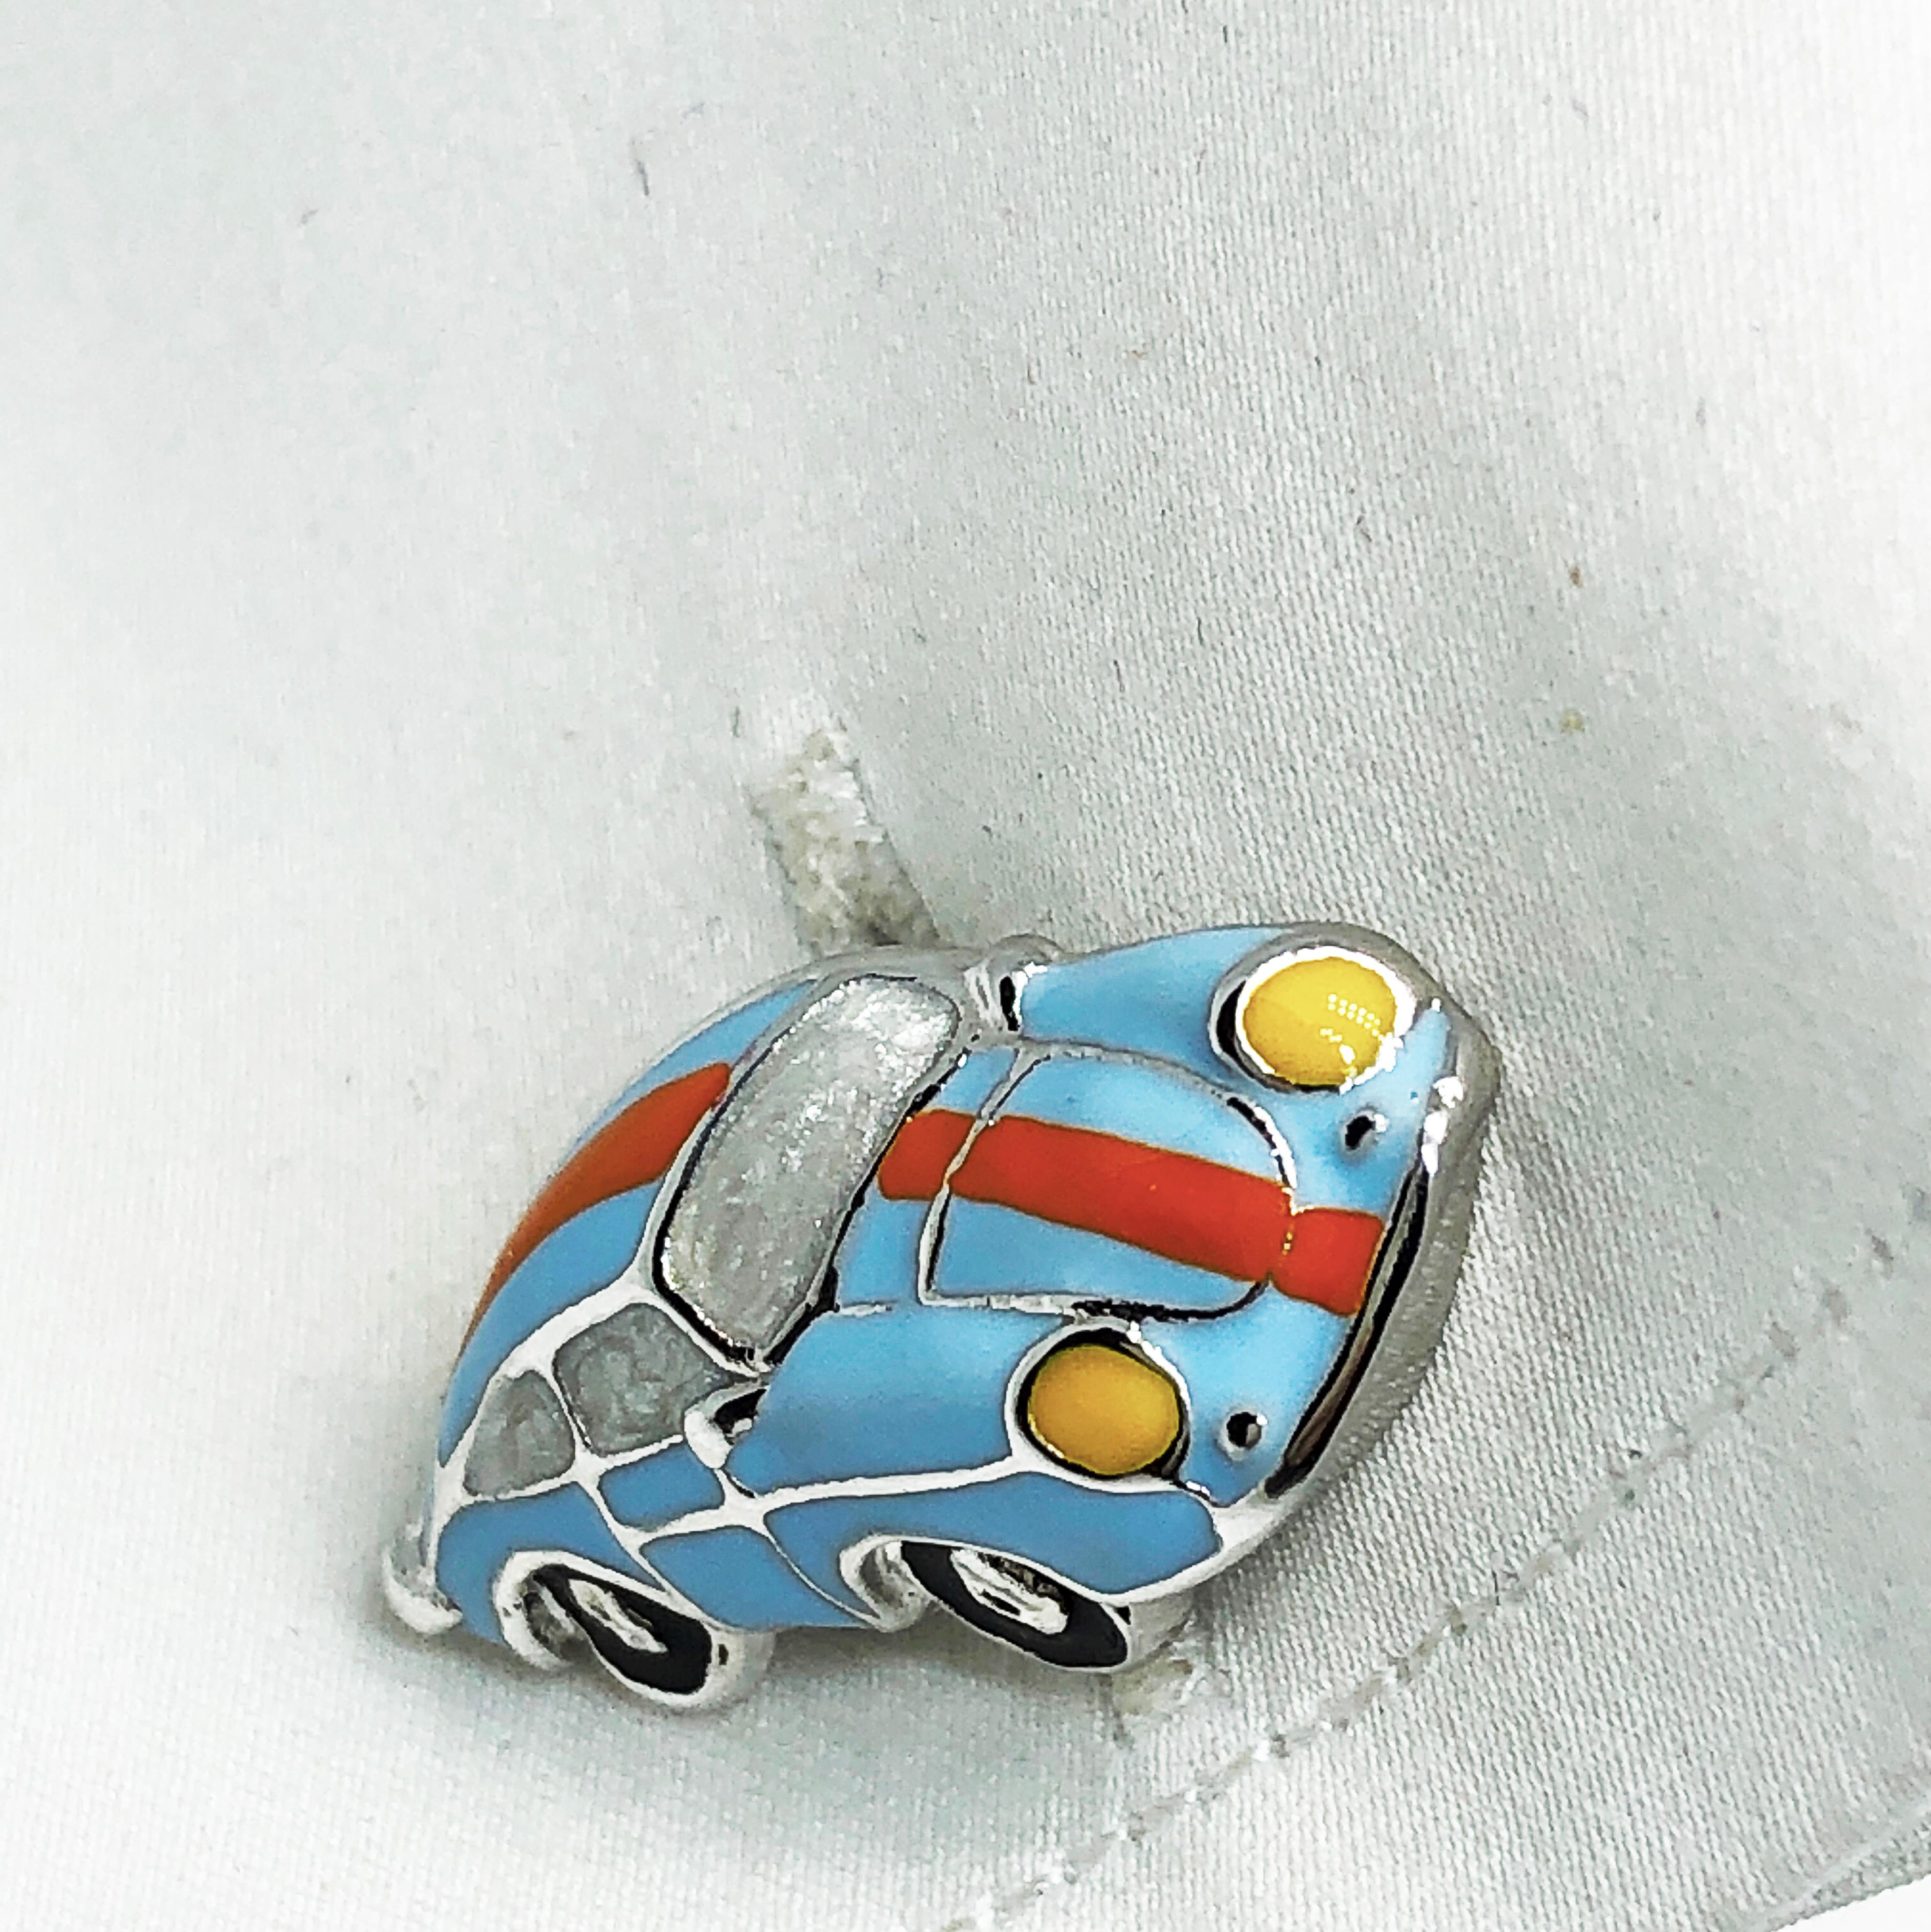 Berca Enameled Le Man’s Racing Color 911Porsche Shaped Sterling Silver Cufflinks 4